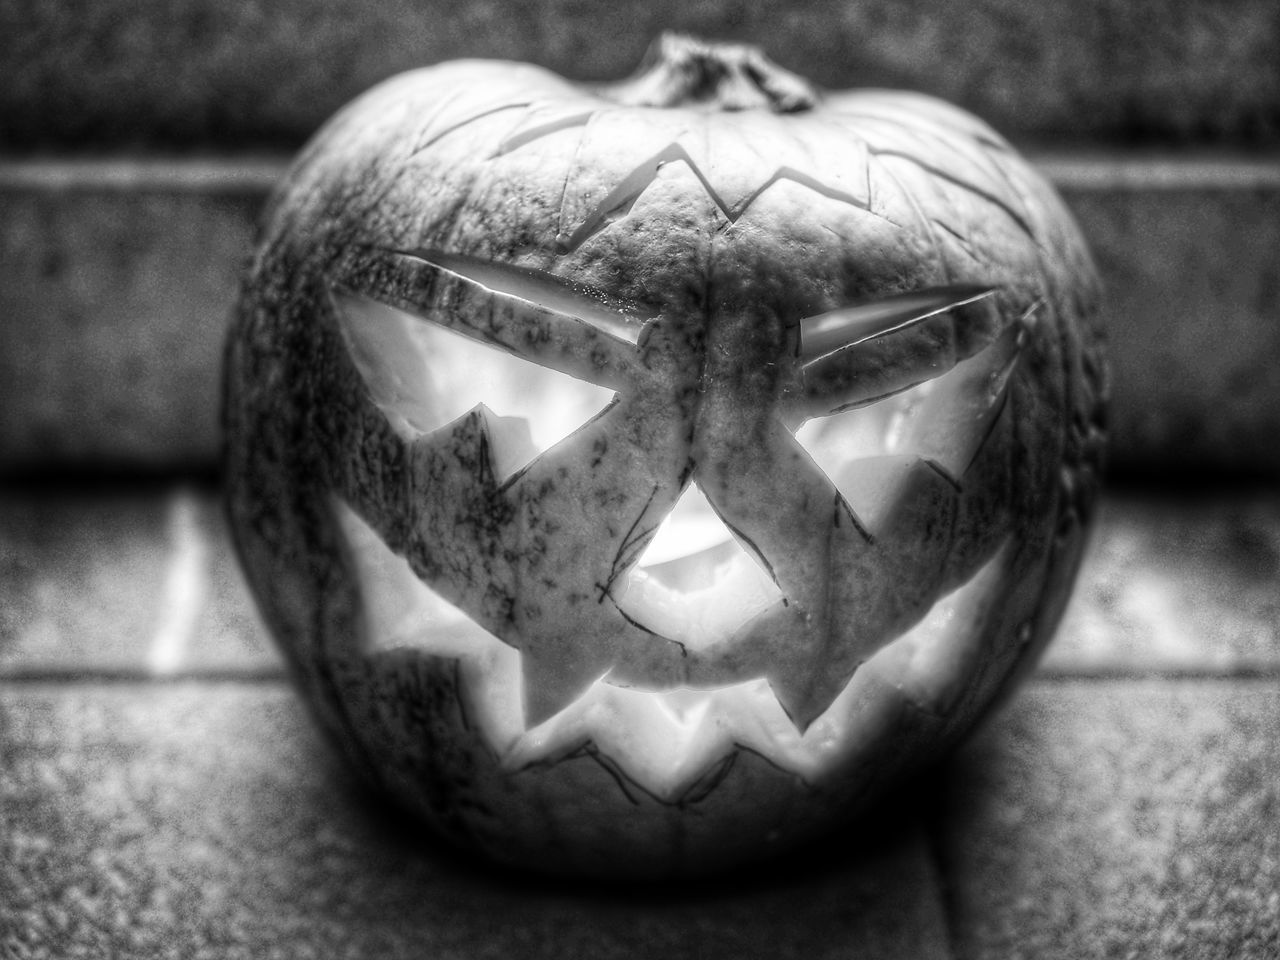 CLOSE-UP OF PUMPKIN FACE ON STONE